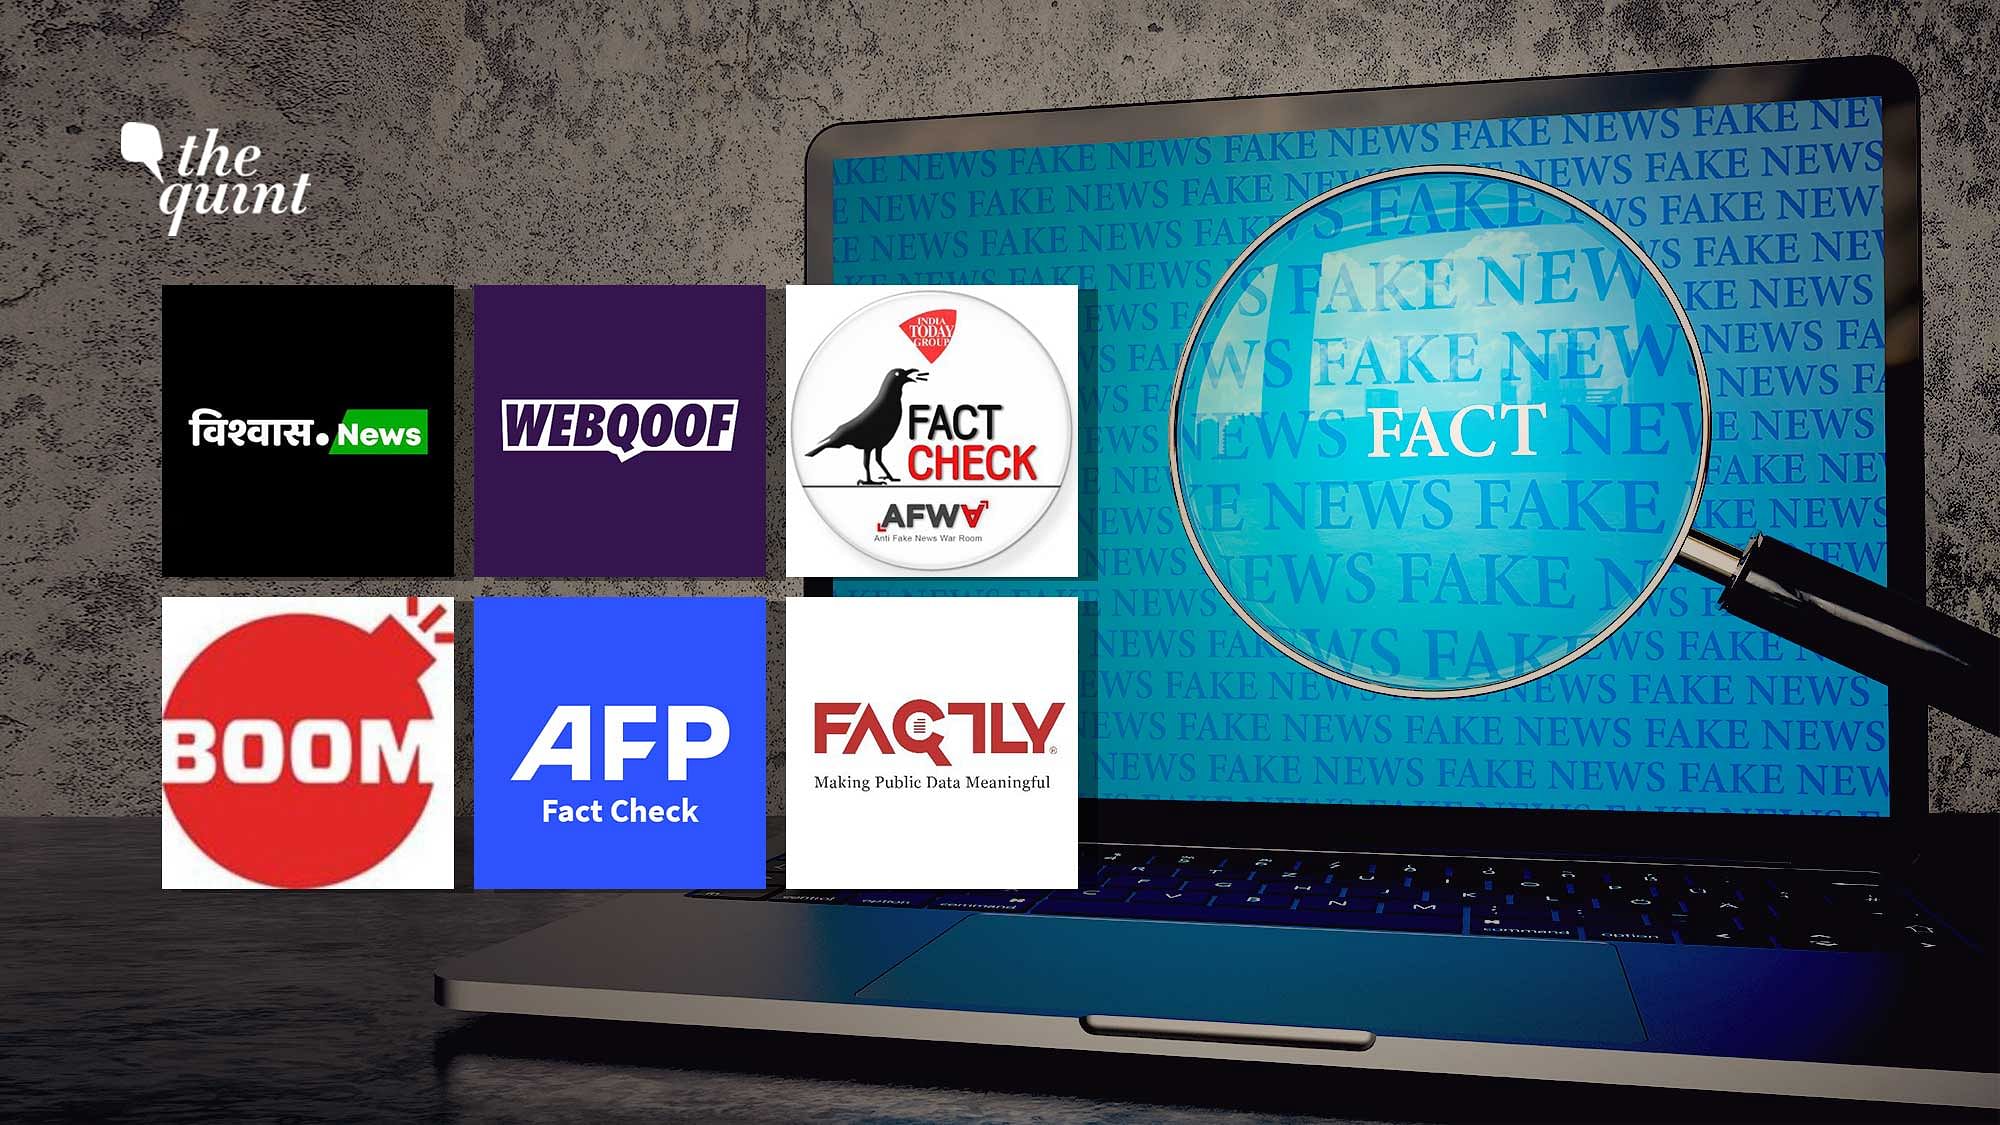 Six fact-checking groups have come together to launch the ‘Ekta’ consortium to address misinformation around the <a href="https://www.thequint.com/elections">2021 Legislative Assembly elections</a>.